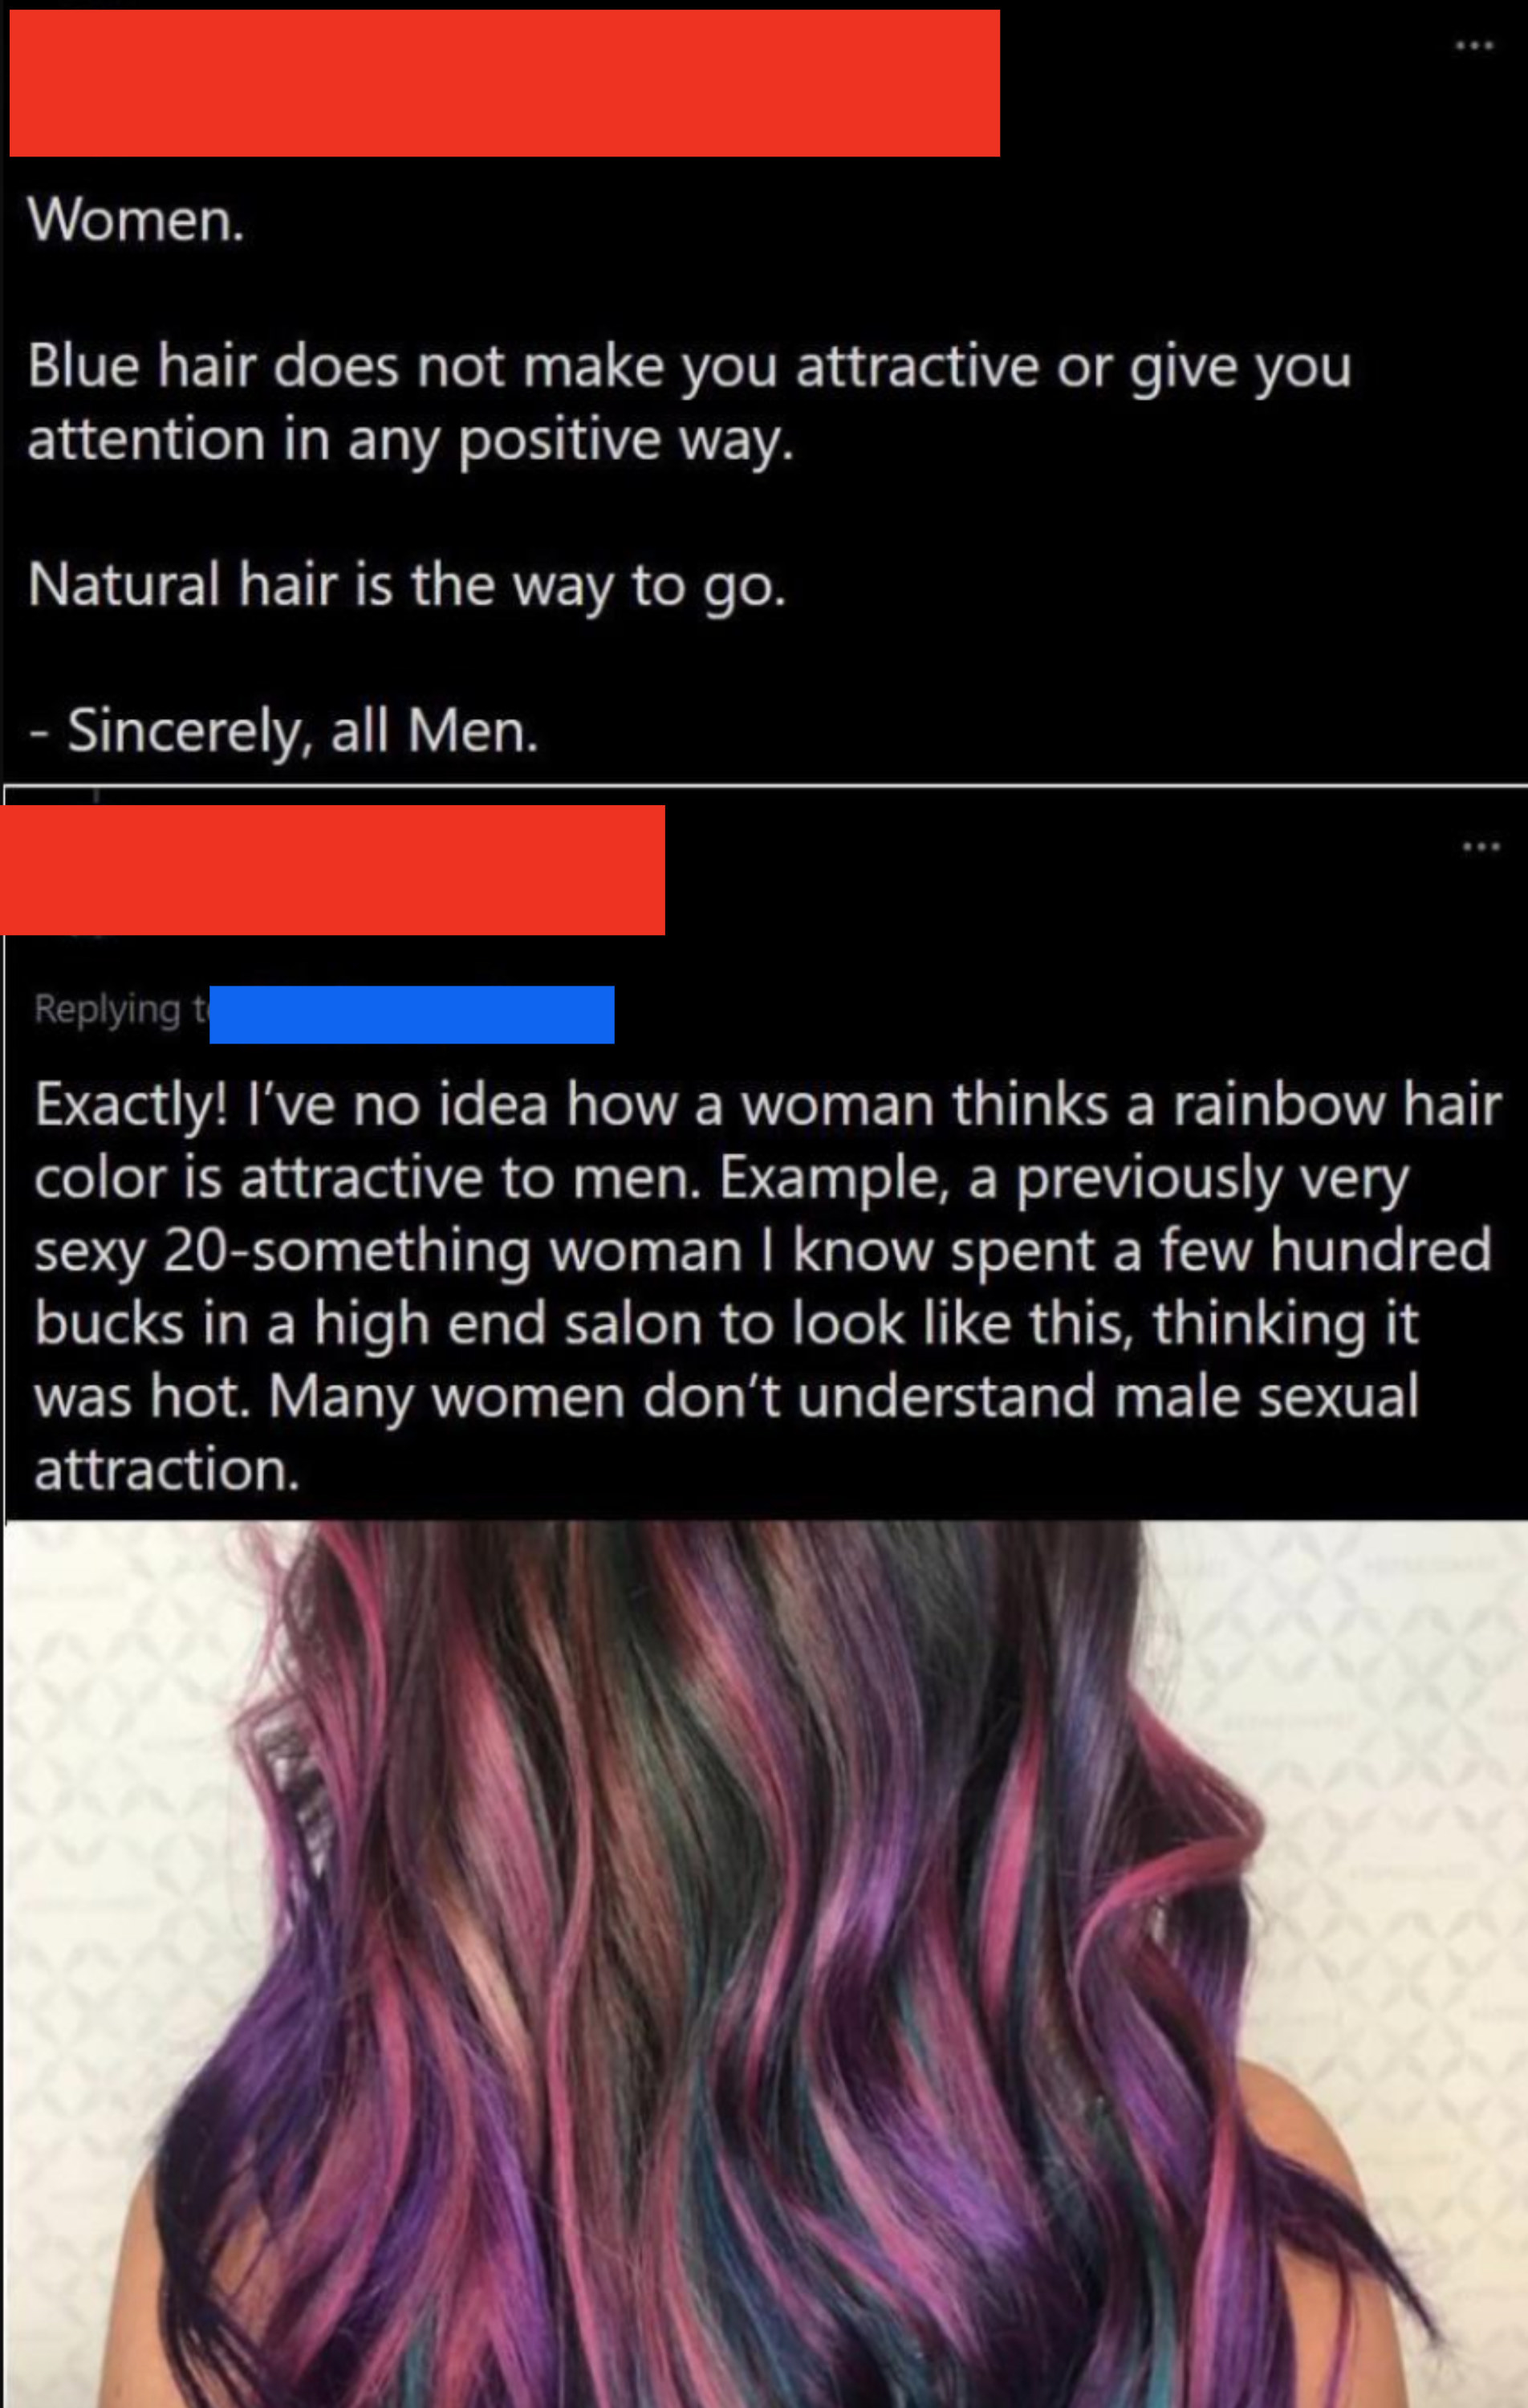 Woman with rainbow-colored hair while a man comments: &quot;Blue hair does not make you attractive or give you attention in any positive way&quot;